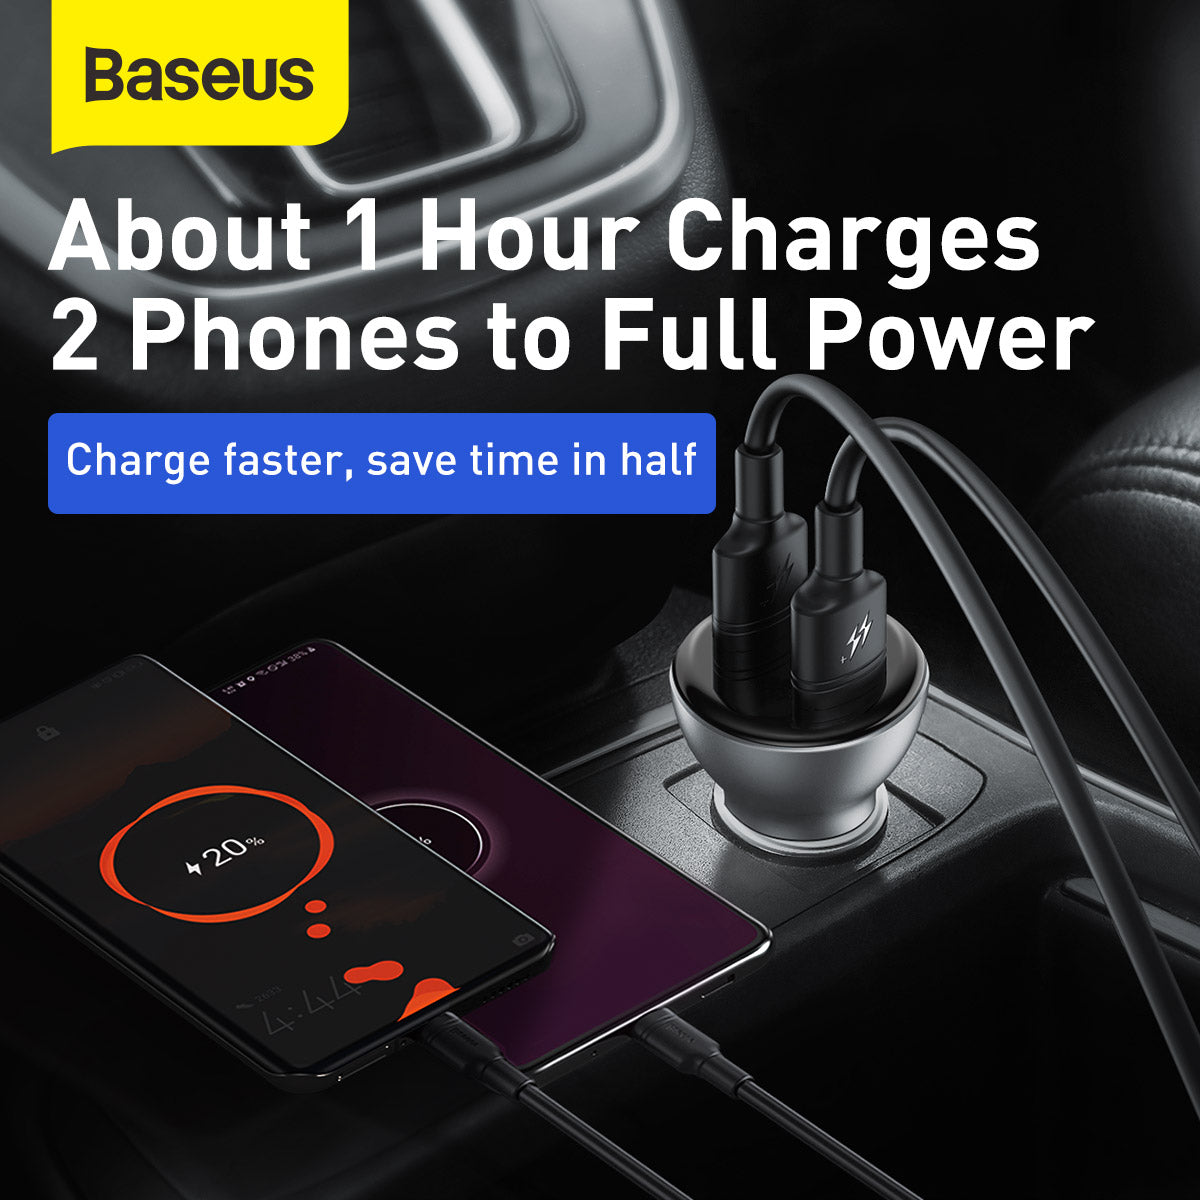 Baseus 2X USB Car Charger 45 W + 3-in-1 USB Cable (CCBX-B0G-1)